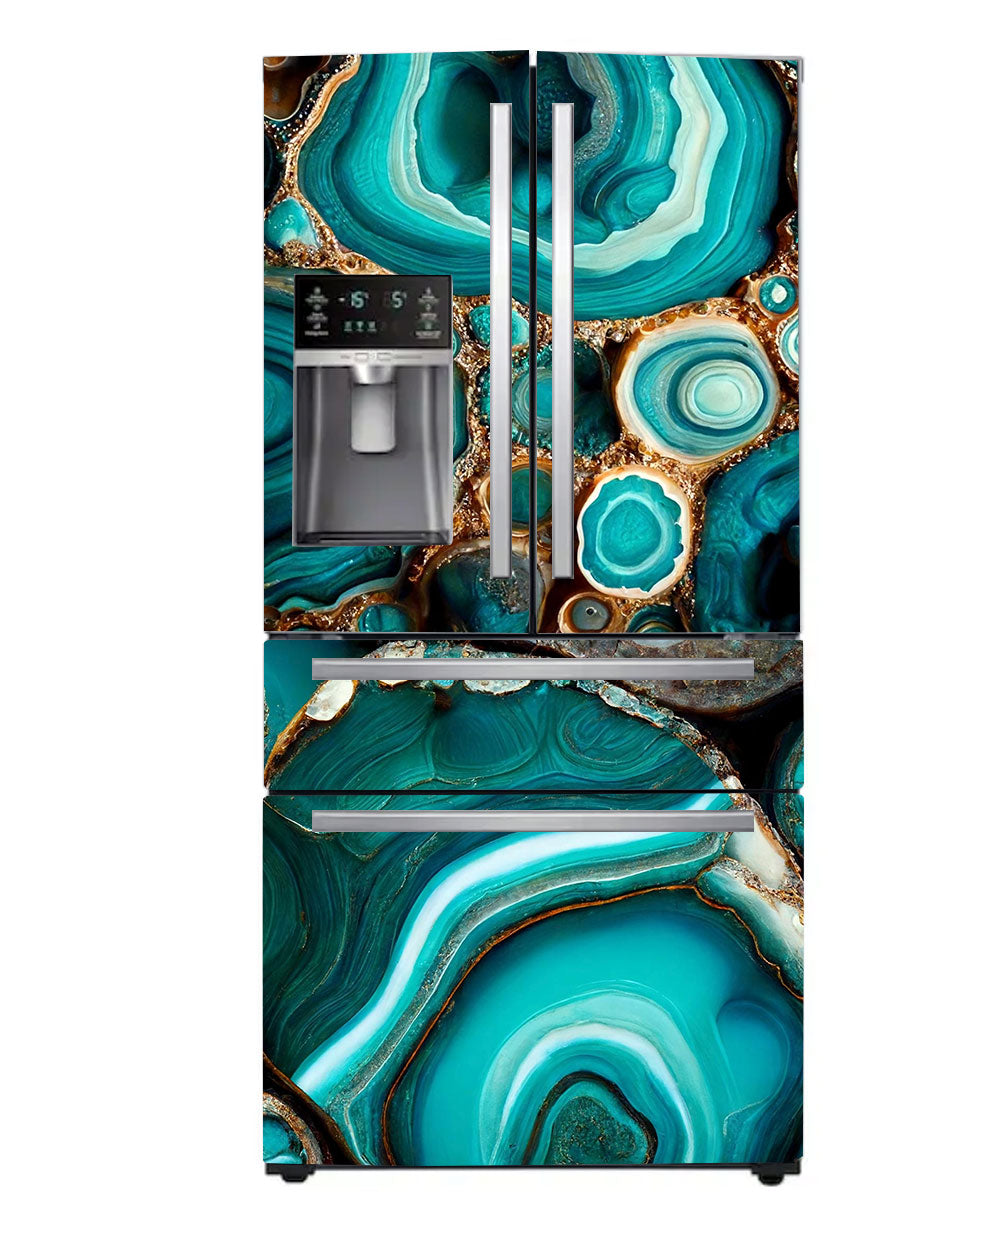 Turquoise agate